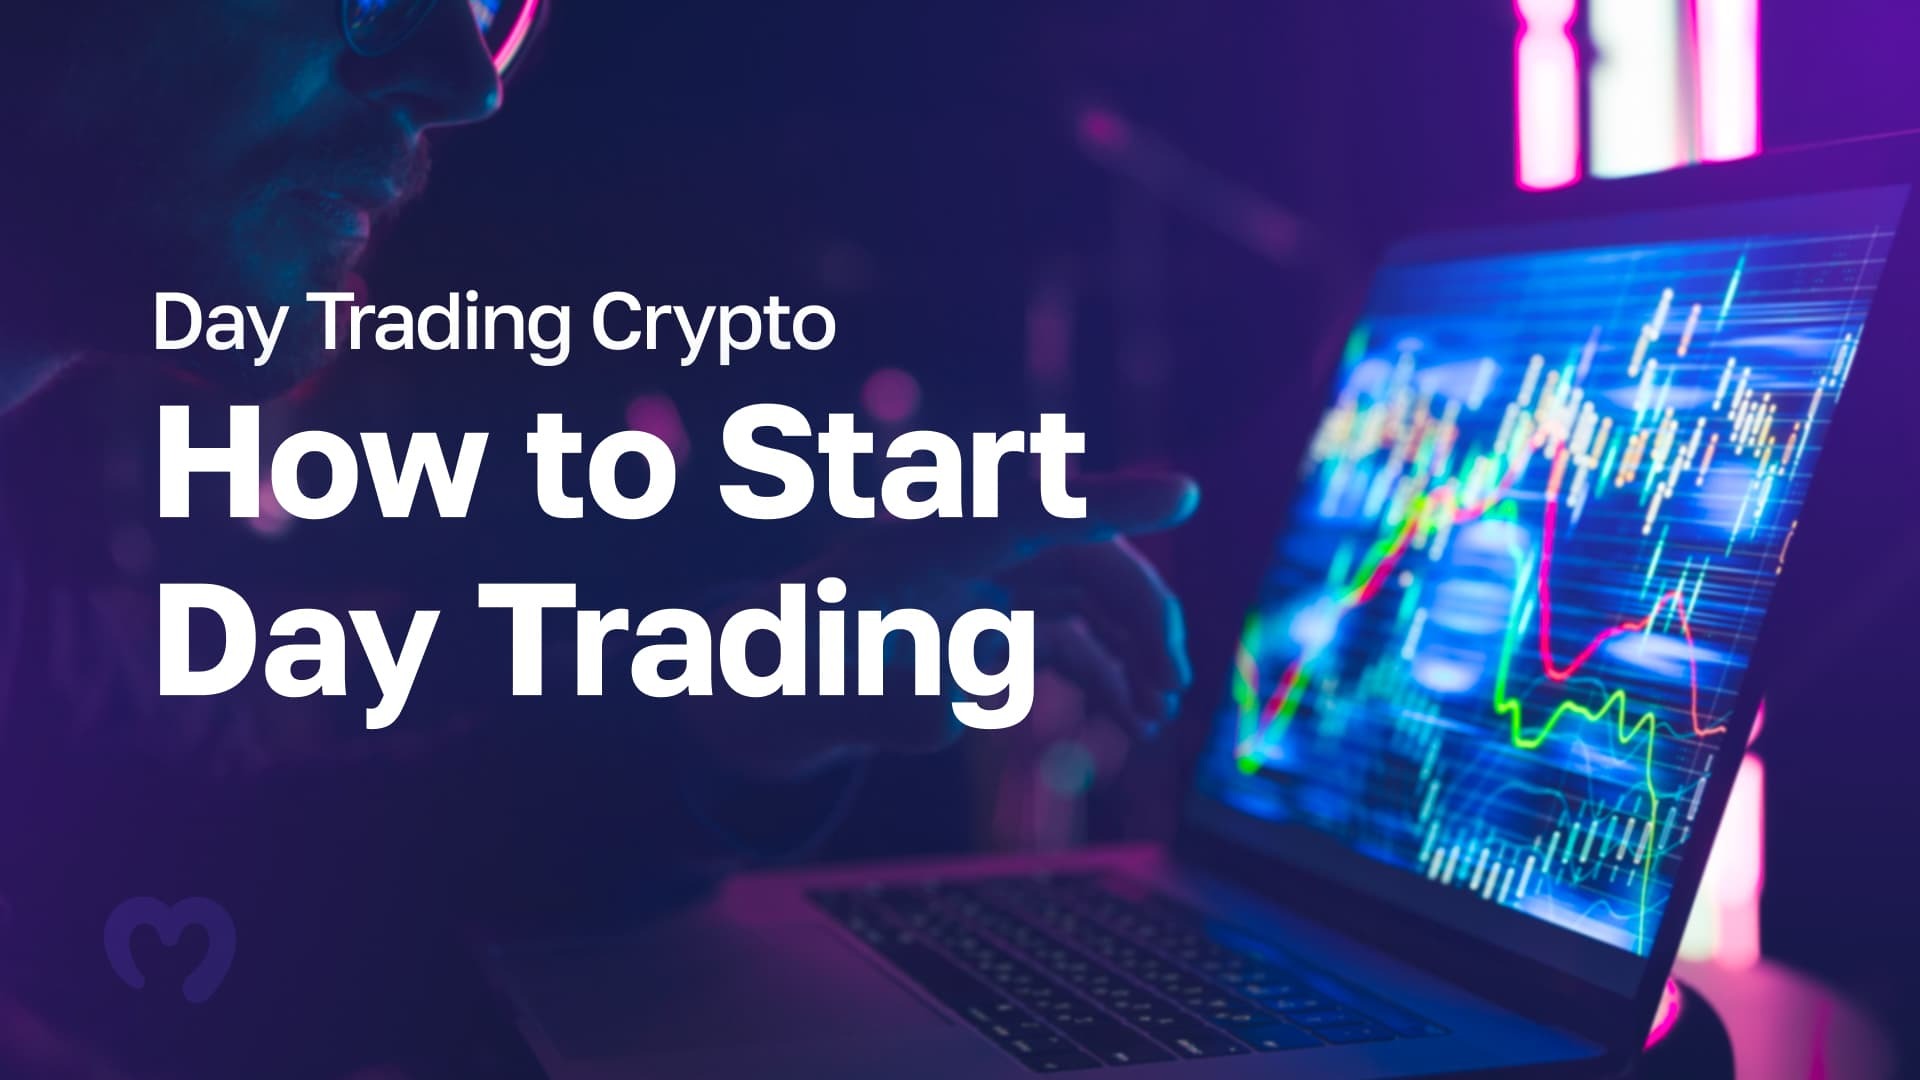 Day Trading Crypto - How to Start Day Trading